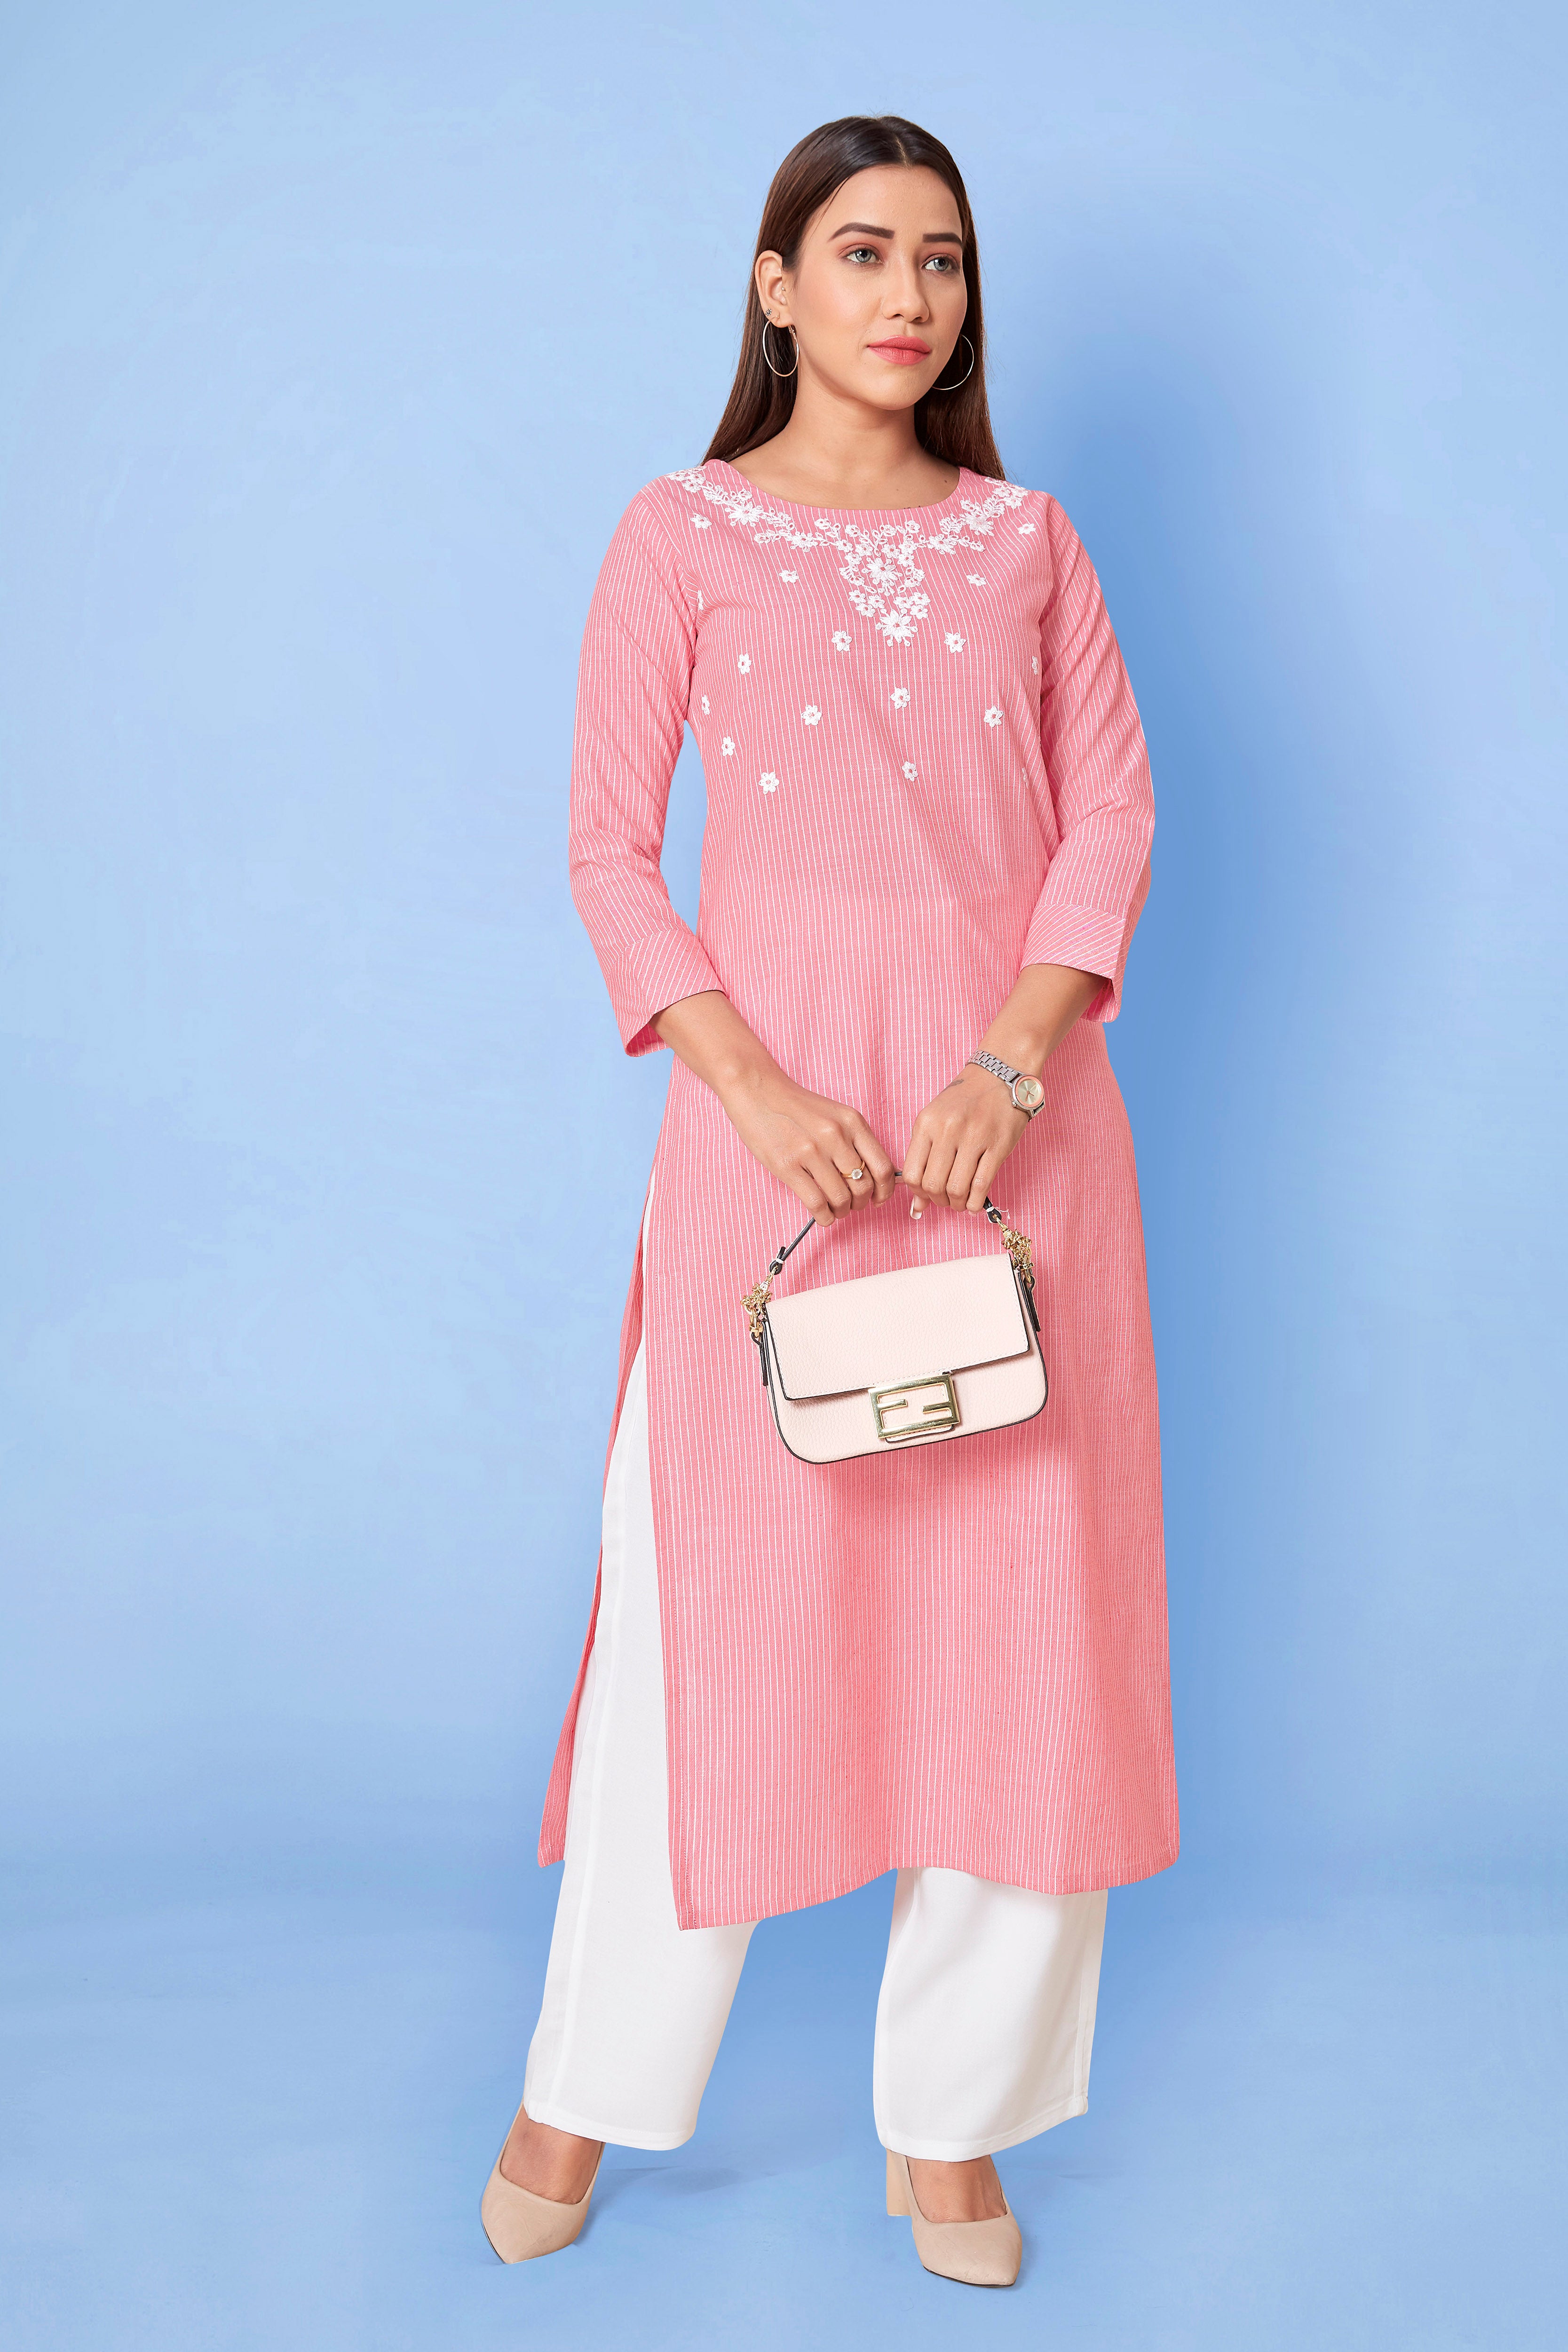 Dressing Up for Navratri: Kurti Styles You Can't-Miss | Zeel Clothing